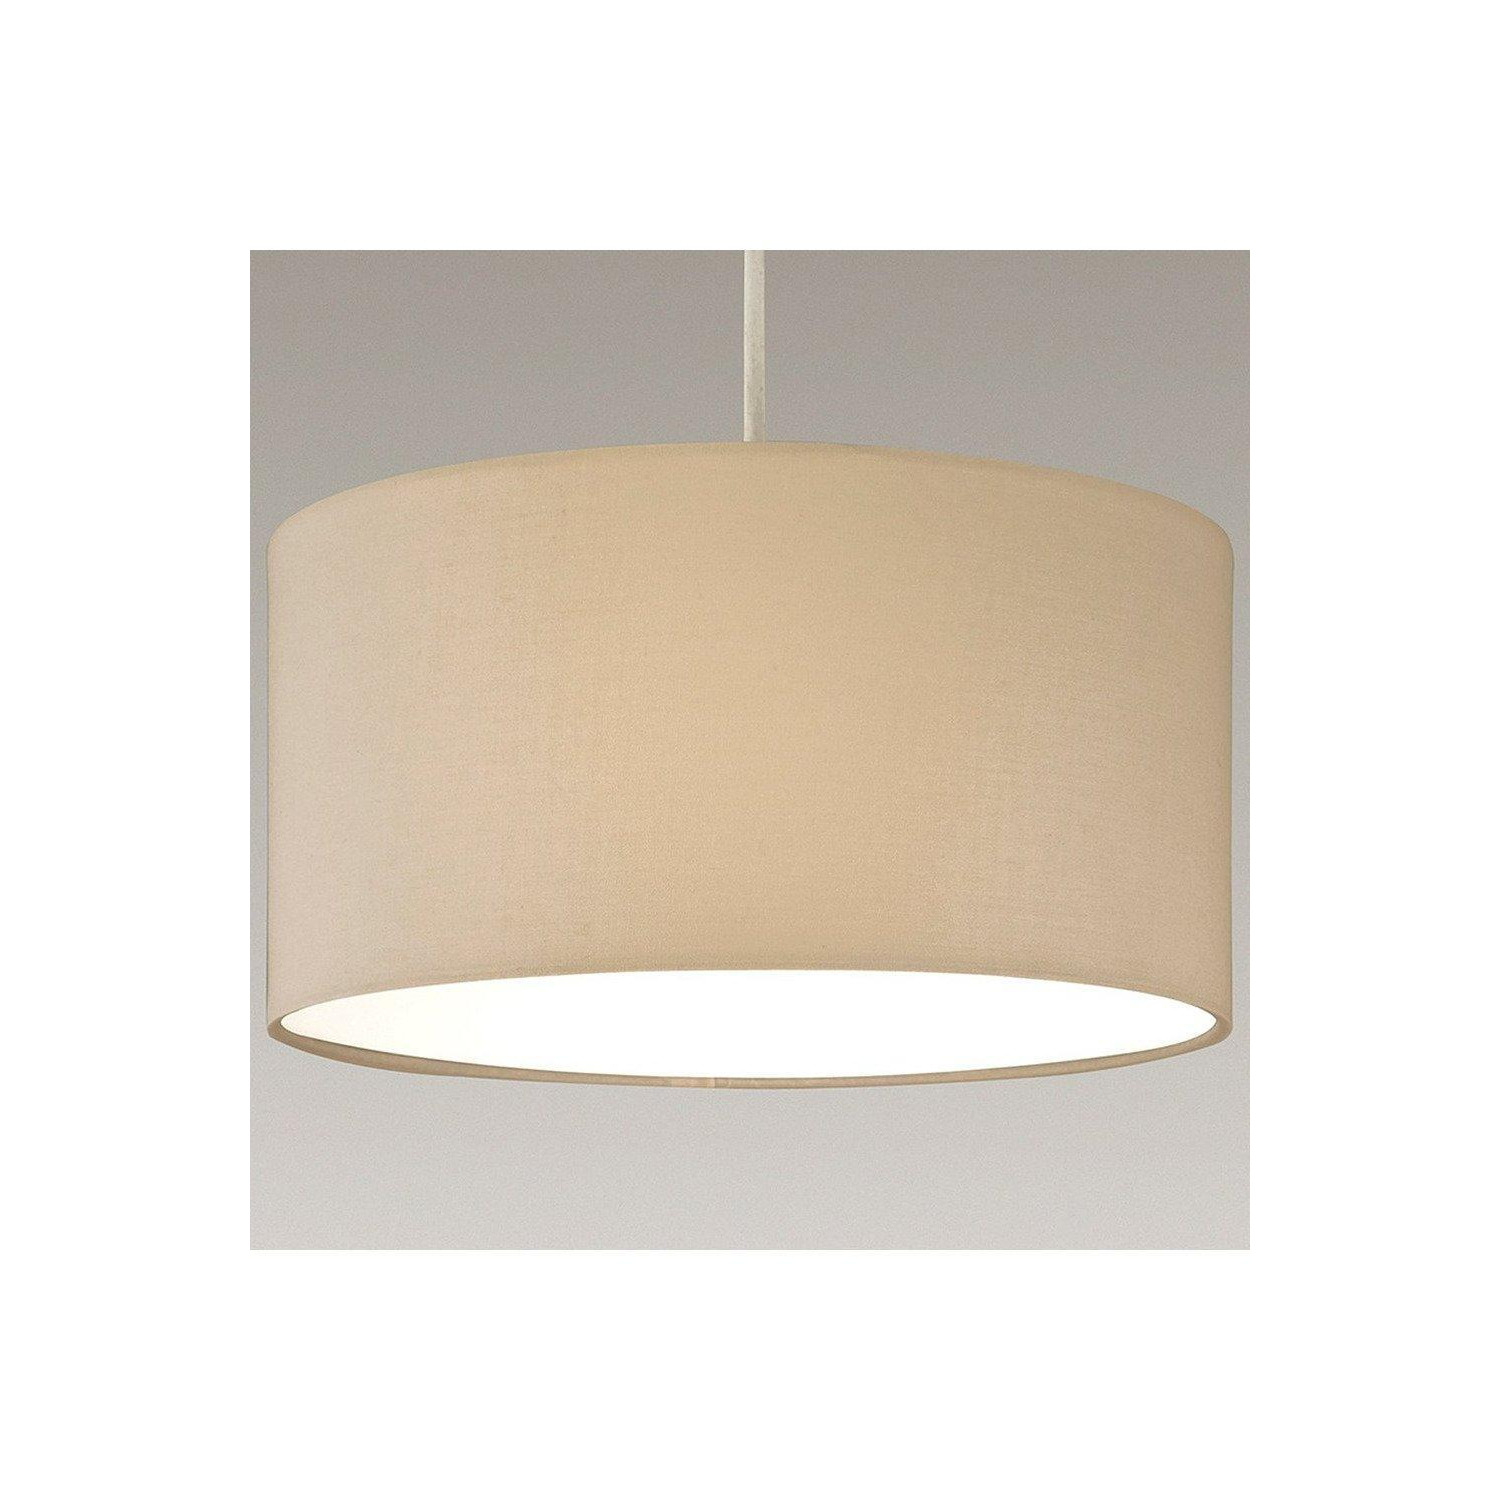 'Lucia' Cream Fabric Ceiling Lamp Shade With Frosted Diffuser - image 1